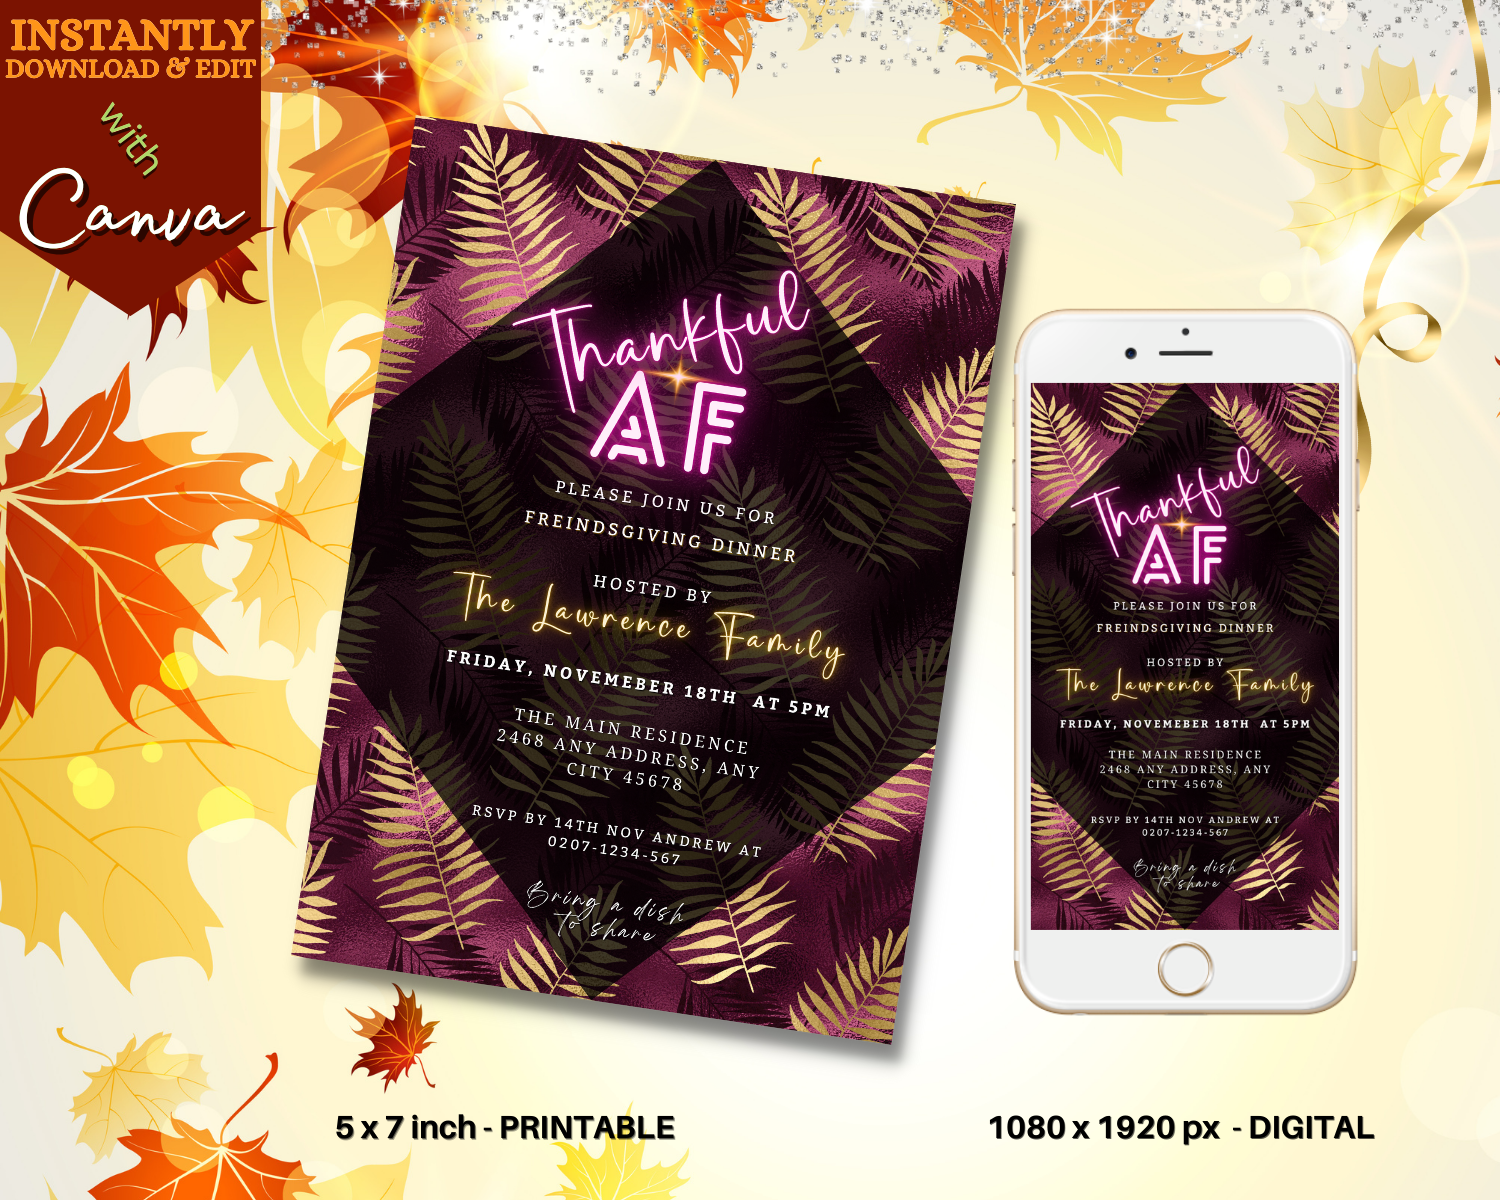 Phone displaying Thankful AF Purple Gold leaves Thanksgiving Dinner Evite next to a similar printed invitation.